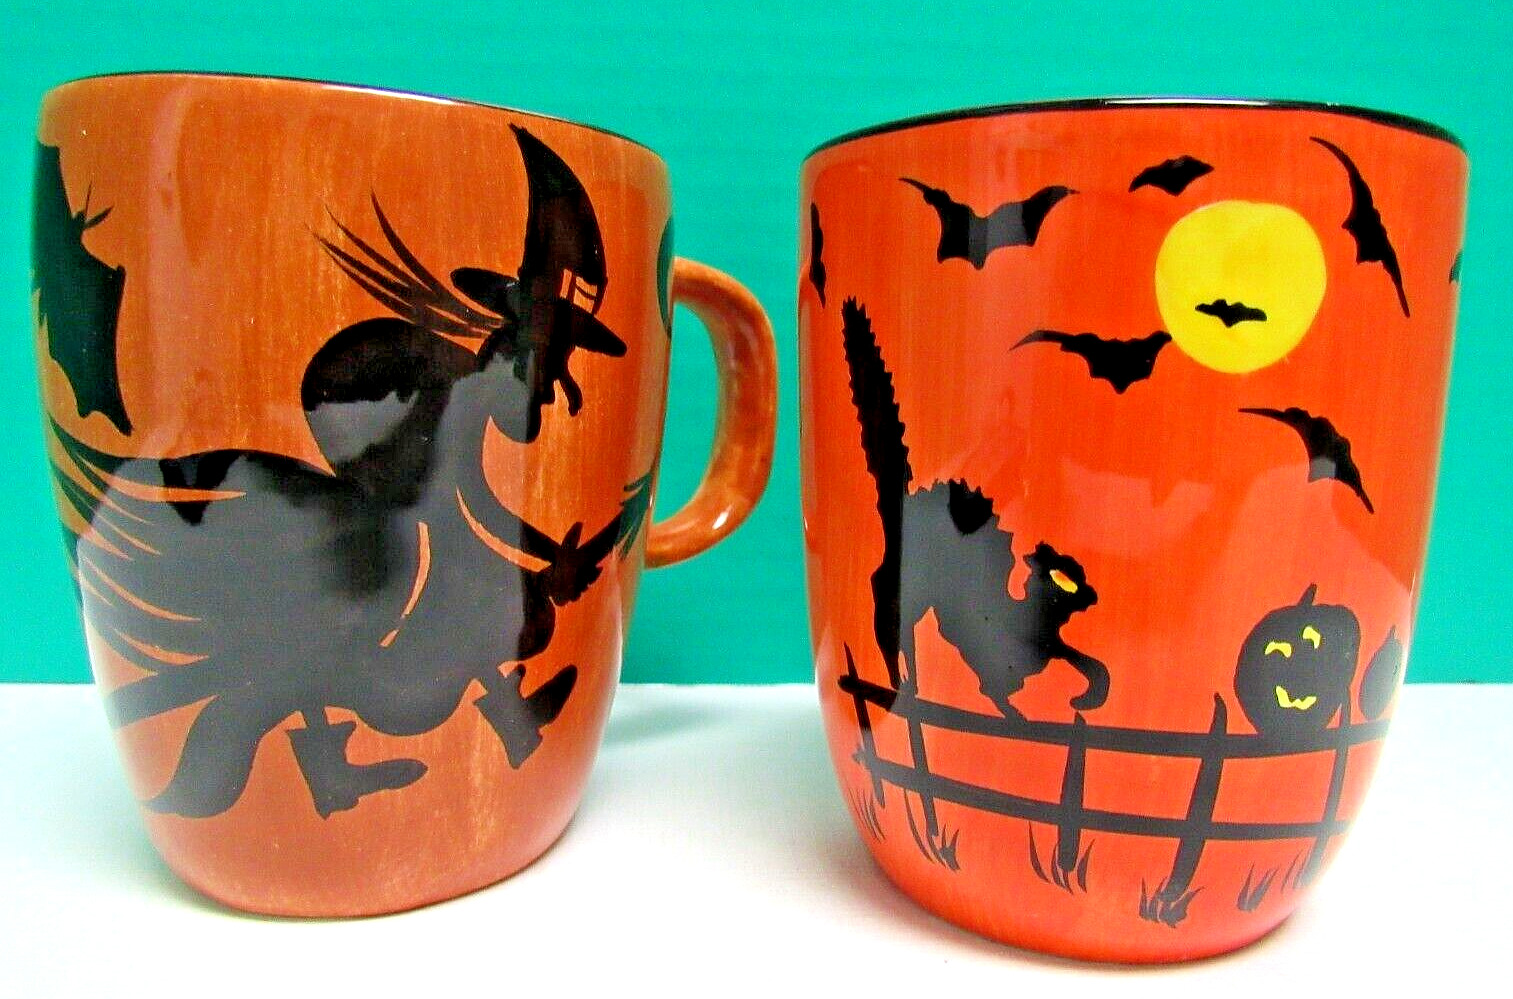 LOT OF 2 HALLOWEEN 12 OZ. CUPS/MUGS FEATURING WITCHES, BLACK CATS, & BATS